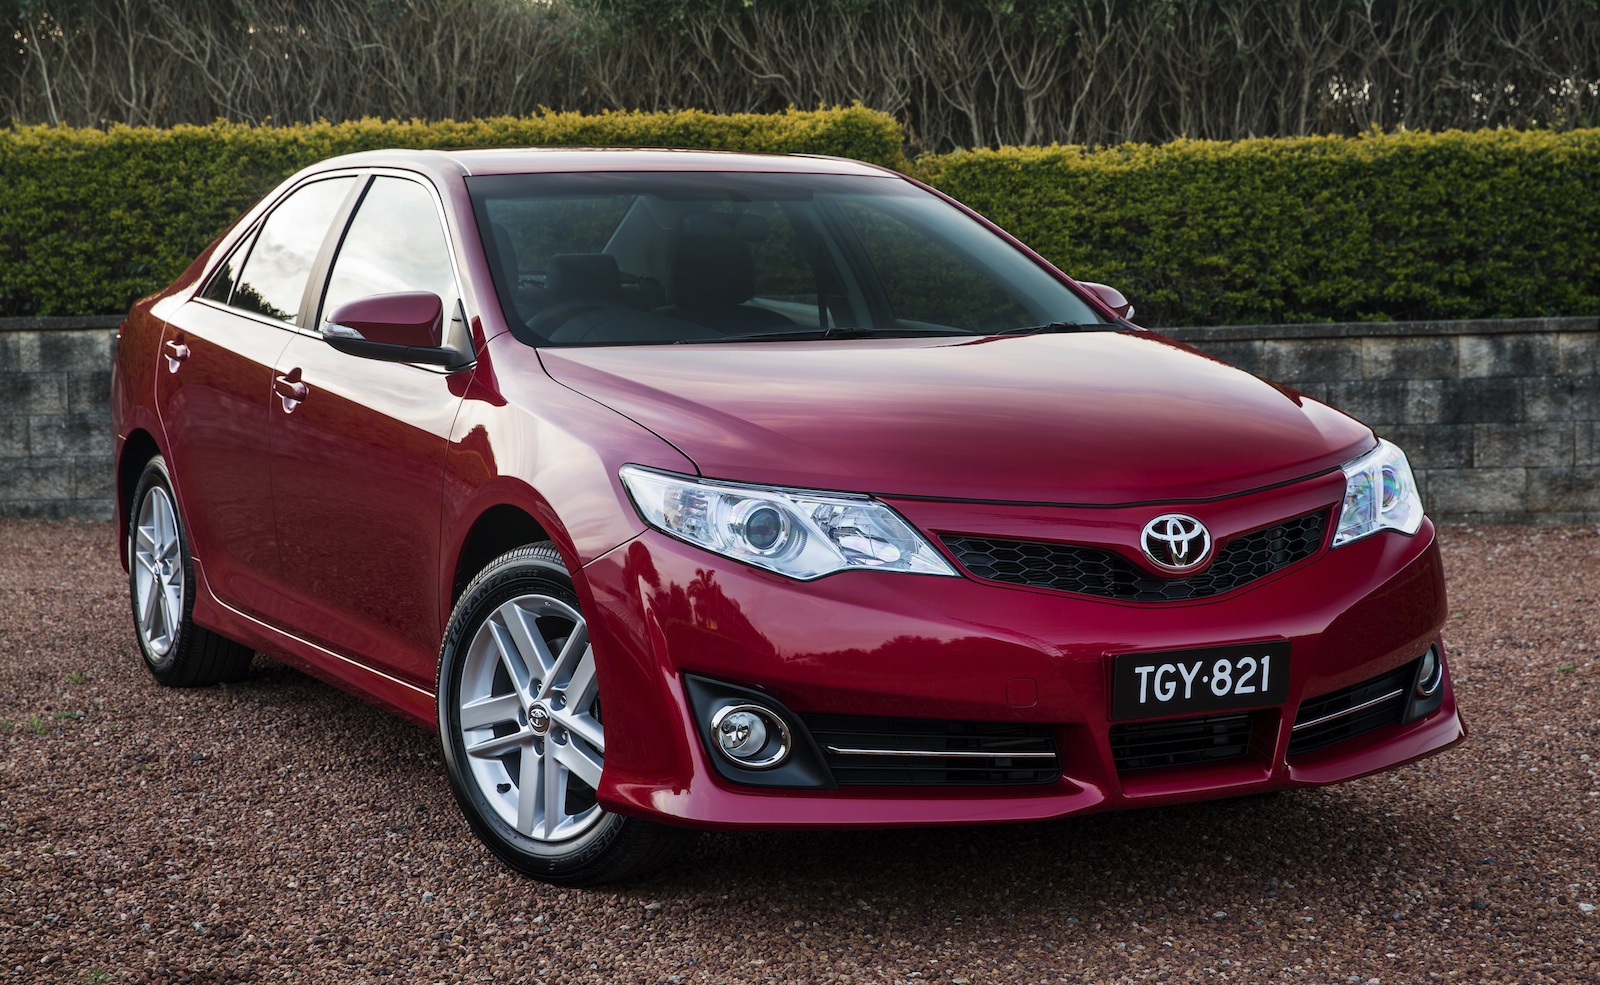 Toyota Camry Atara R: value-packed special edition released - photos ...
